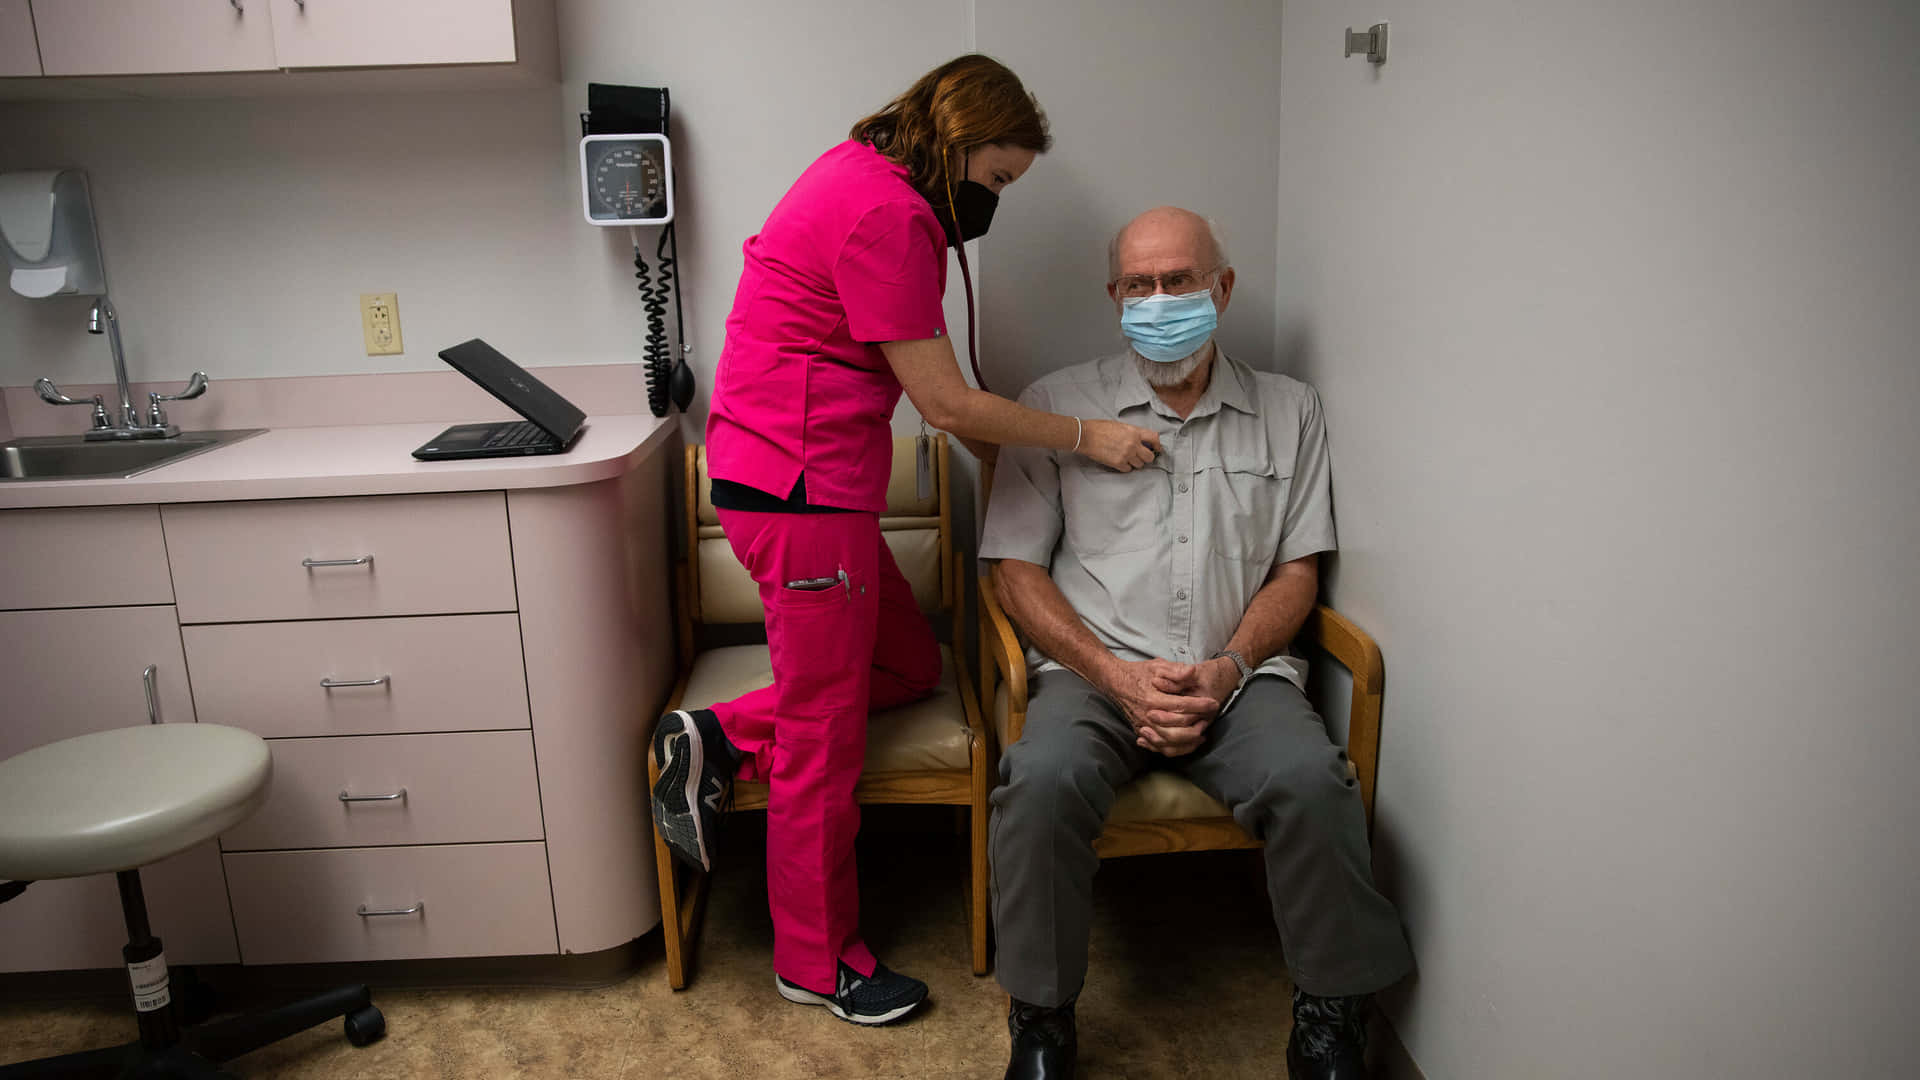 A Nurse Is Assisting A Patient In A Room